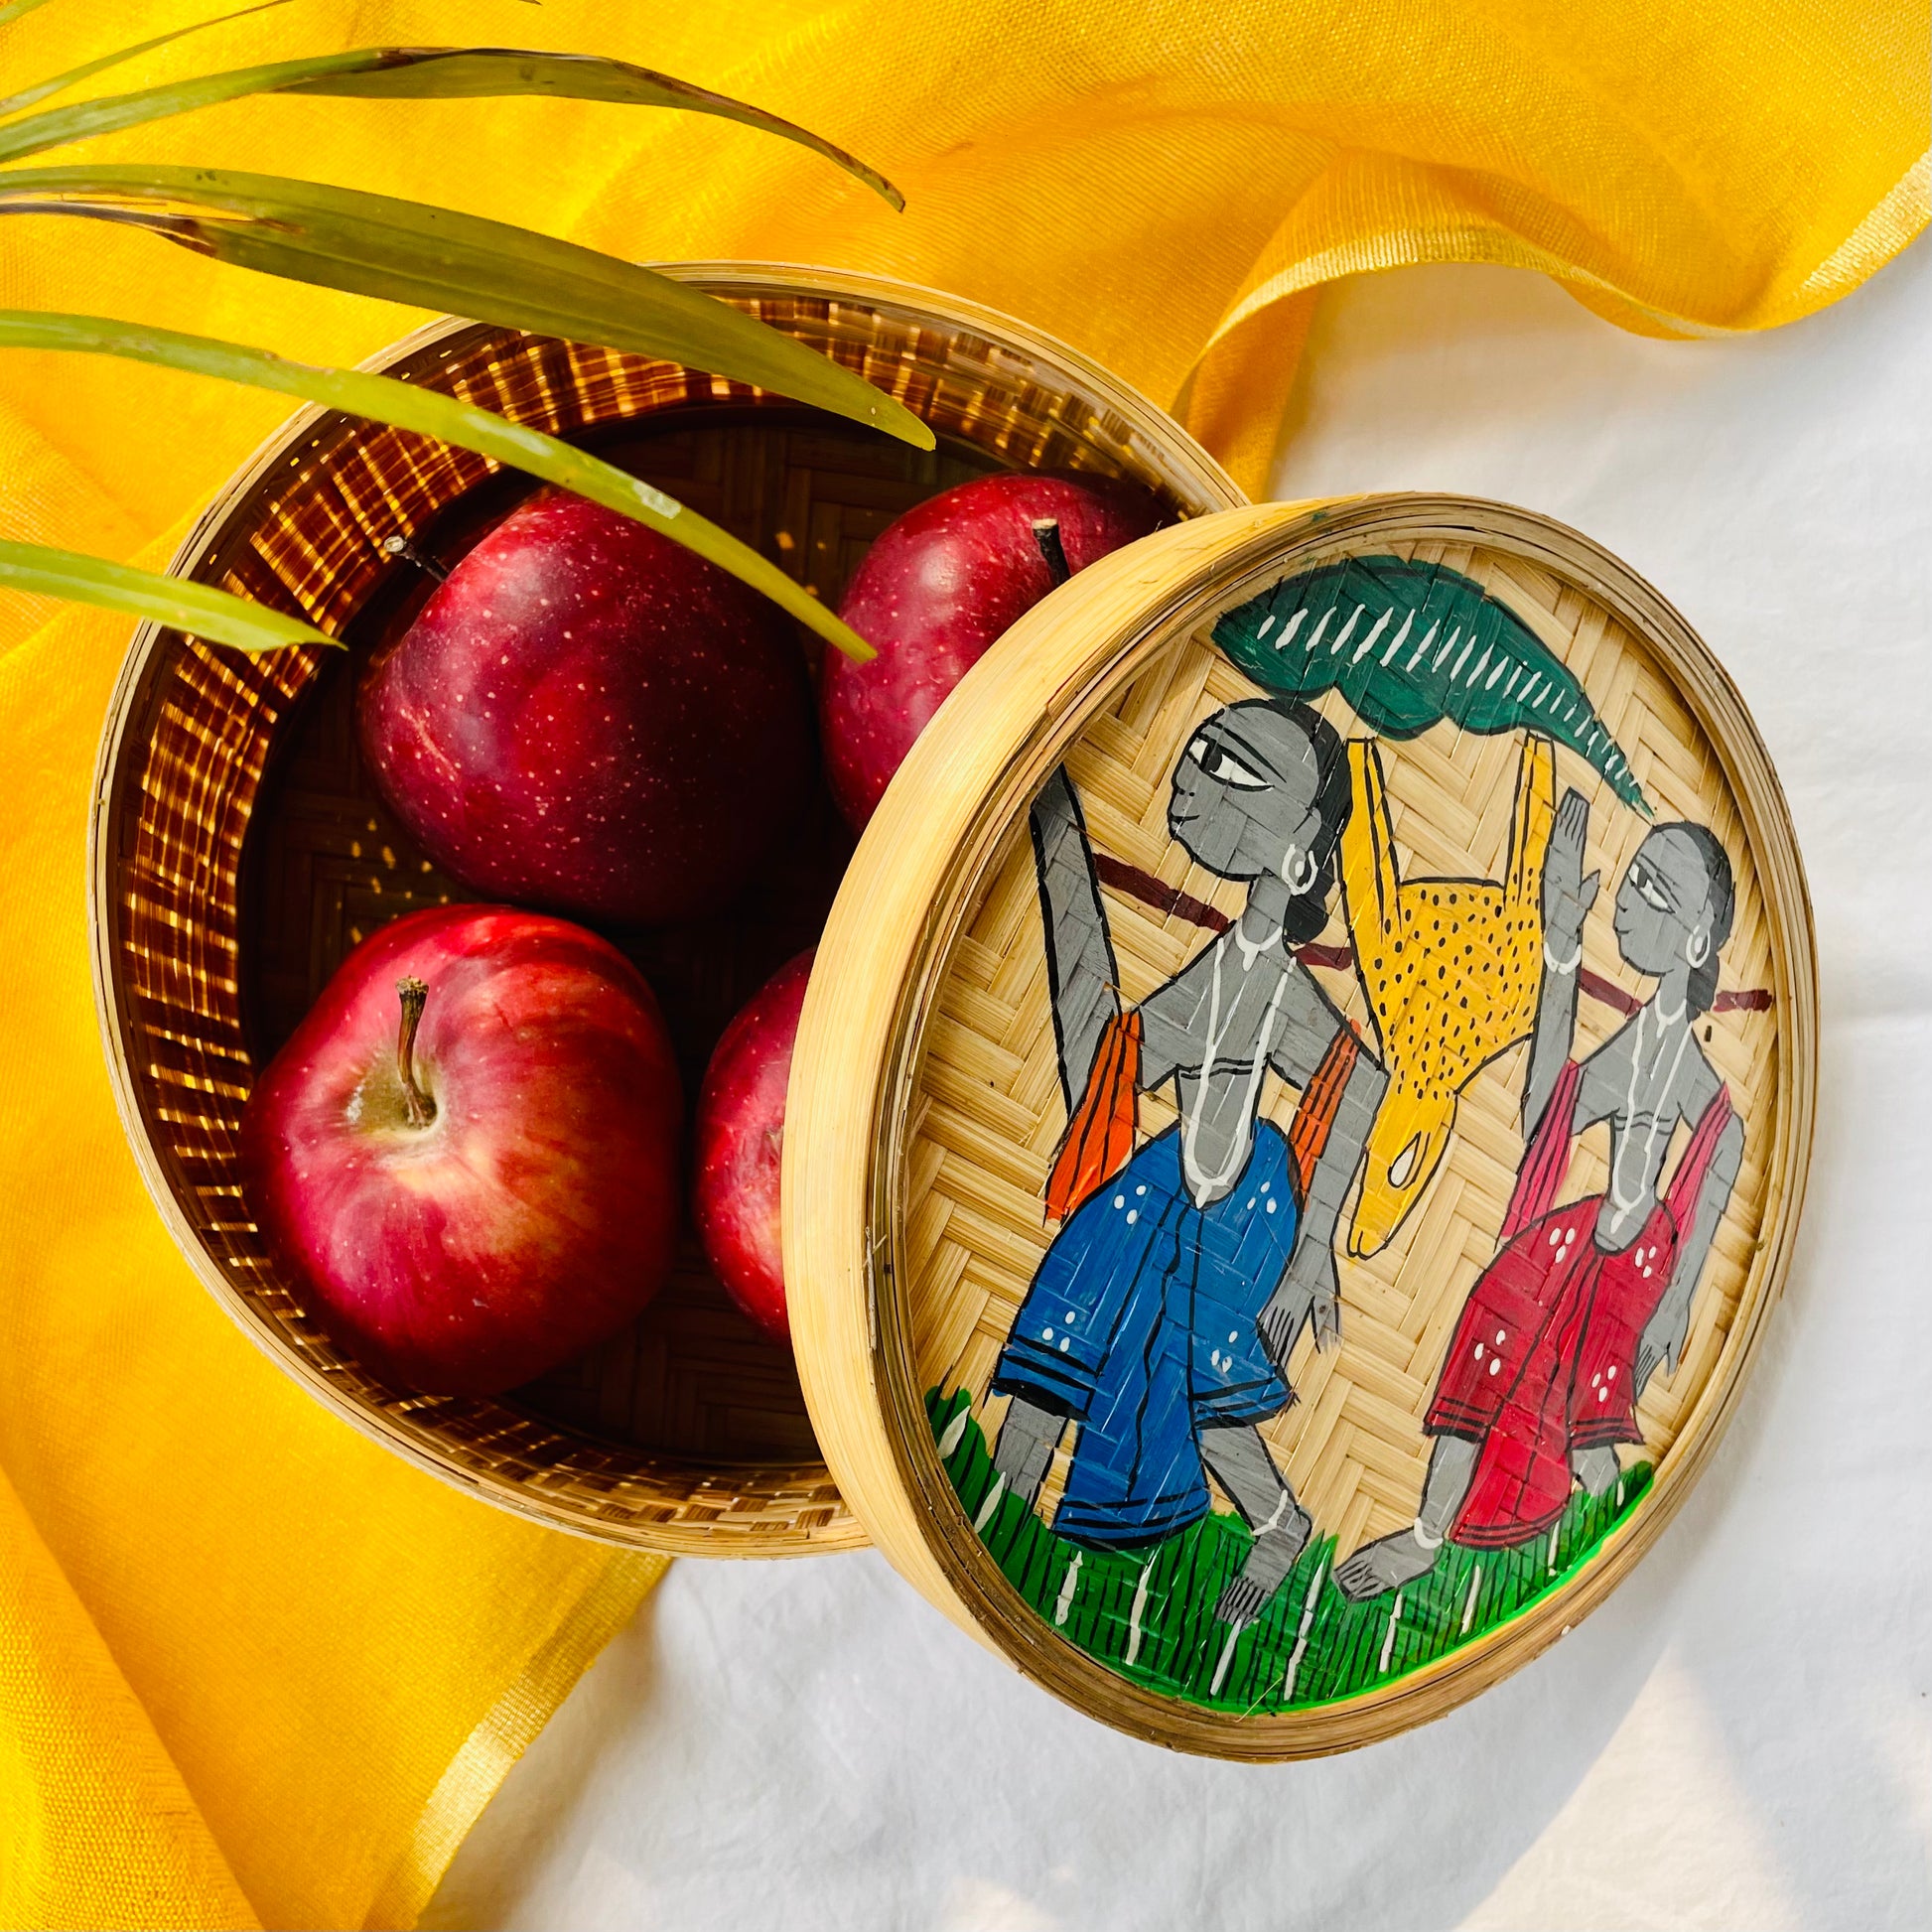 A handwoven bamboo box hand painted with a motif of tribal characters and filled with four apples is displayed against a yellow and white background